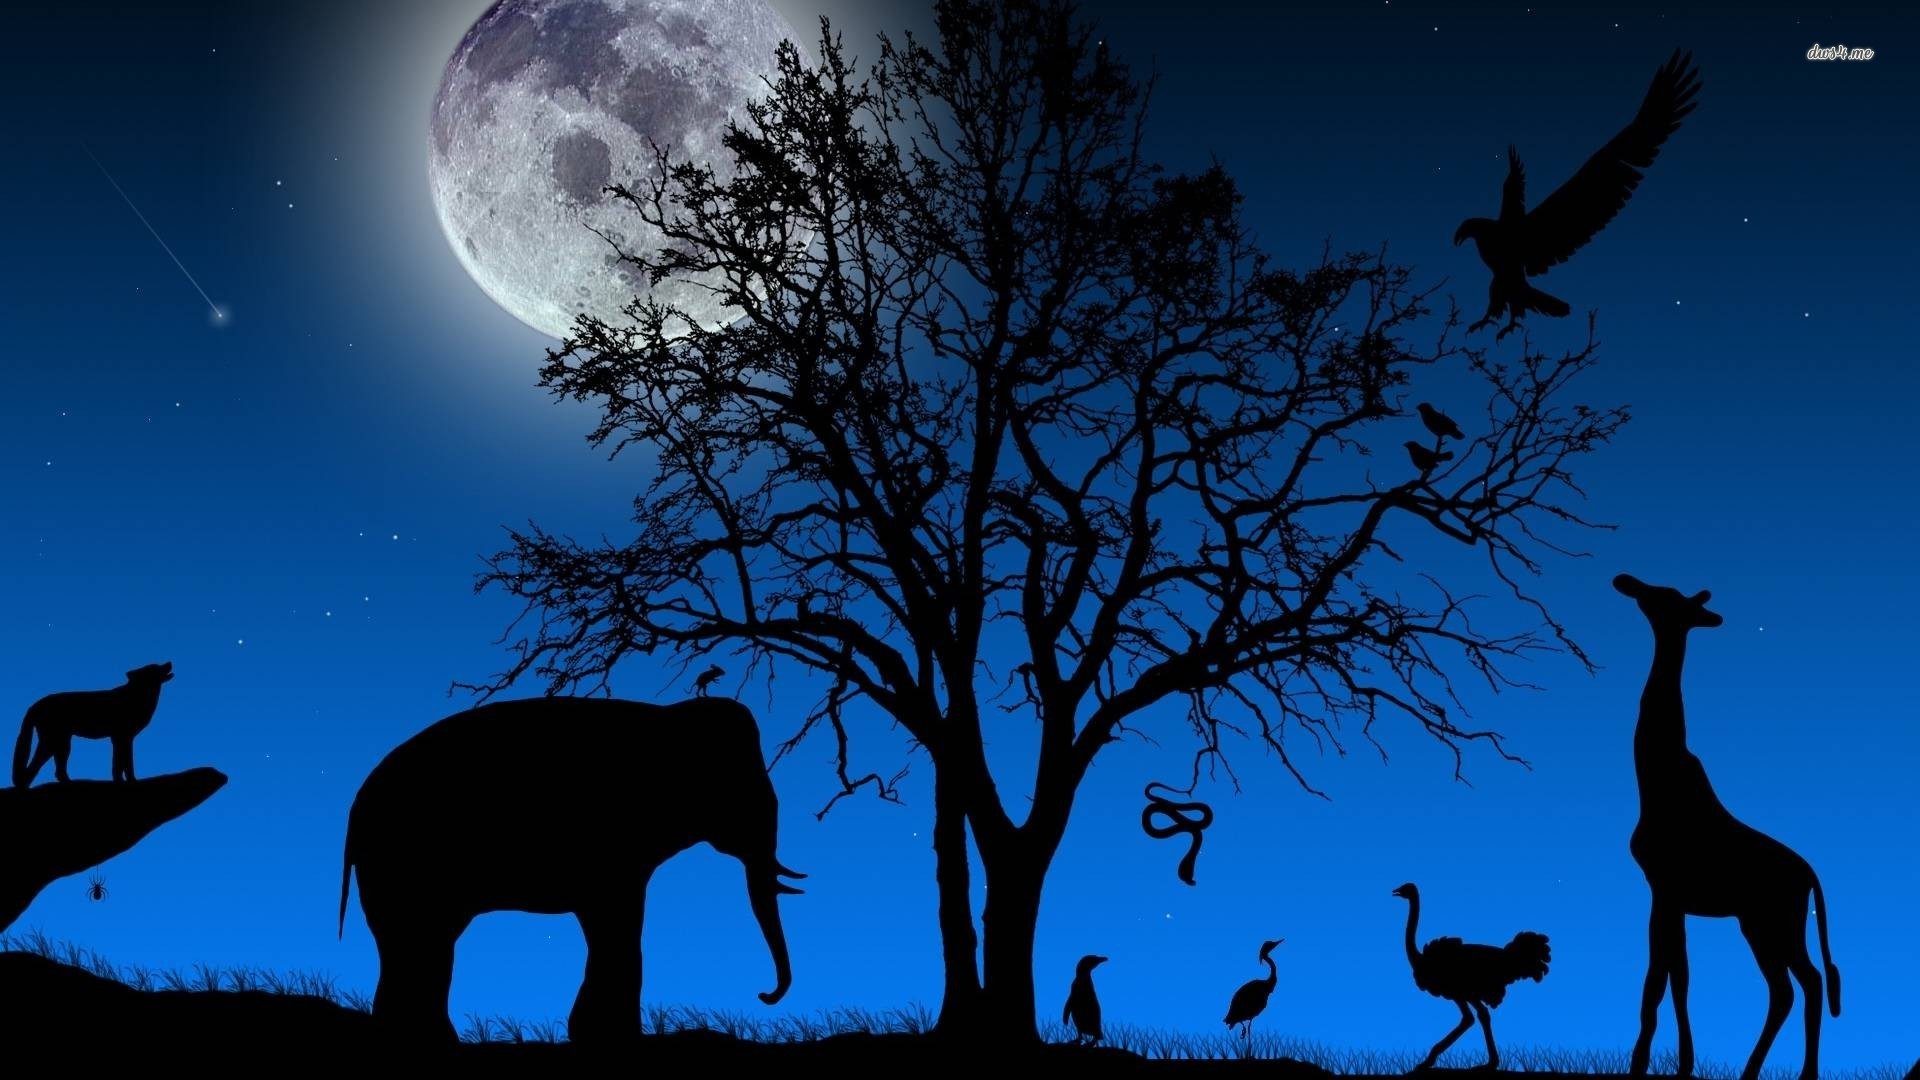 Animal silhouettes in the night wallpaper 1280x800 Animal silhouettes